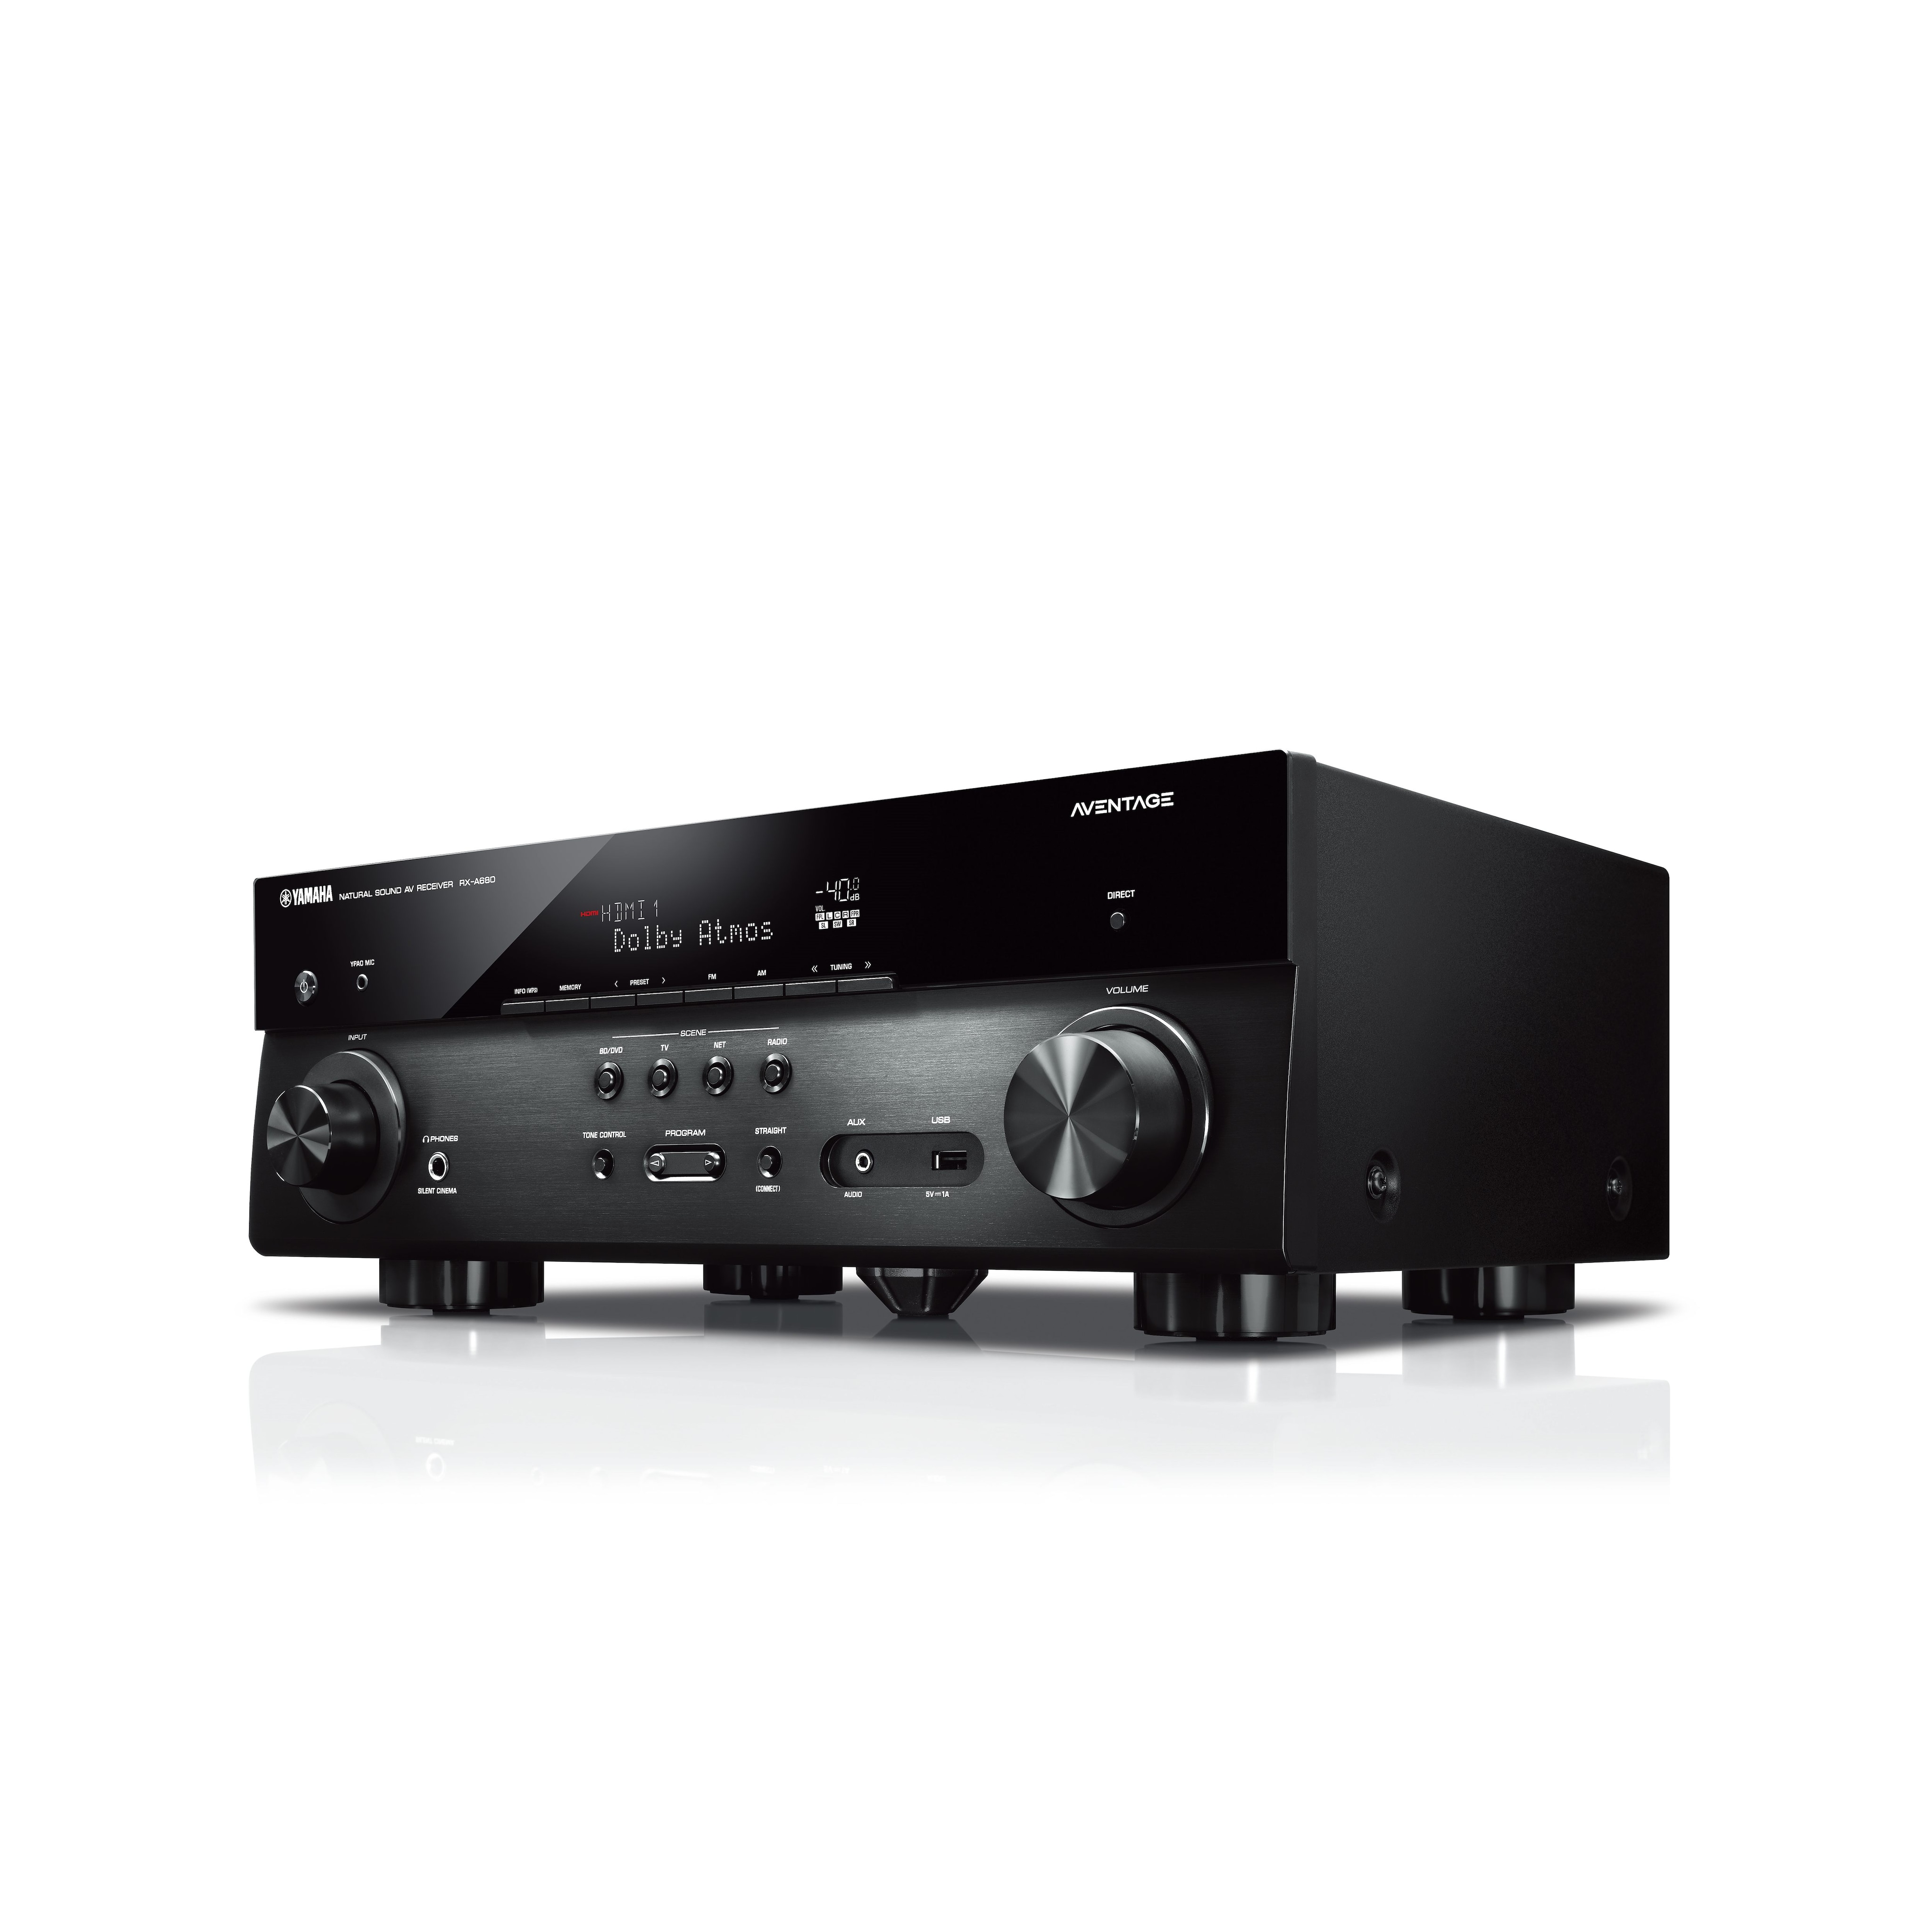 RX-A880 - Overview - AV Receivers - Audio & Visual - Products